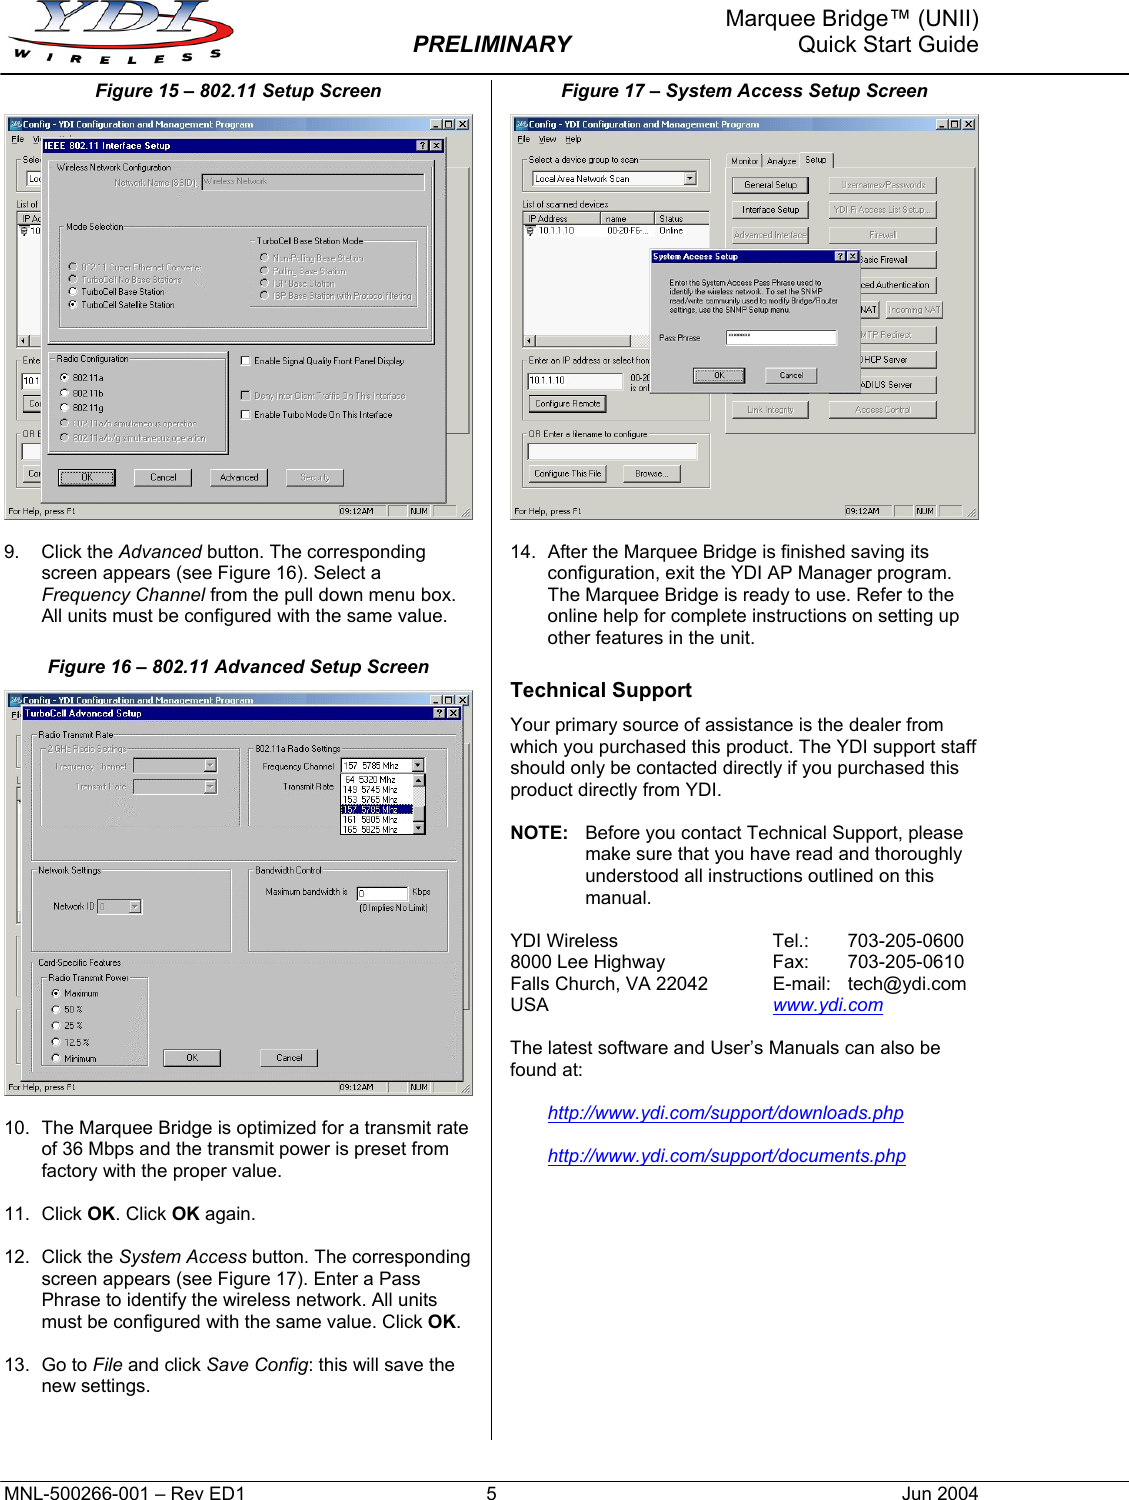     Marquee Bridge™ (UNII)  PRELIMINARY  Quick Start Guide Figure 15 – 802.11 Setup Screen   9. Click the Advanced button. The corresponding screen appears (see Figure 16). Select a Frequency Channel from the pull down menu box. All units must be configured with the same value. Figure 16 – 802.11 Advanced Setup Screen   10.  The Marquee Bridge is optimized for a transmit rate of 36 Mbps and the transmit power is preset from factory with the proper value.  11. Click OK. Click OK again.  12. Click the System Access button. The corresponding screen appears (see Figure 17). Enter a Pass Phrase to identify the wireless network. All units must be configured with the same value. Click OK.  13. Go to File and click Save Config: this will save the new settings.   Figure 17 – System Access Setup Screen   14.  After the Marquee Bridge is finished saving its configuration, exit the YDI AP Manager program. The Marquee Bridge is ready to use. Refer to the online help for complete instructions on setting up other features in the unit. Technical Support Your primary source of assistance is the dealer from which you purchased this product. The YDI support staff should only be contacted directly if you purchased this product directly from YDI.  NOTE:  Before you contact Technical Support, please make sure that you have read and thoroughly understood all instructions outlined on this manual.  YDI Wireless  Tel.:   703-205-0600 8000 Lee Highway  Fax:   703-205-0610 Falls Church, VA 22042  E-mail:  tech@ydi.com USA  www.ydi.com  The latest software and User’s Manuals can also be found at:  http://www.ydi.com/support/downloads.php  http://www.ydi.com/support/documents.php MNL-500266-001 – Rev ED1  5  Jun 2004 